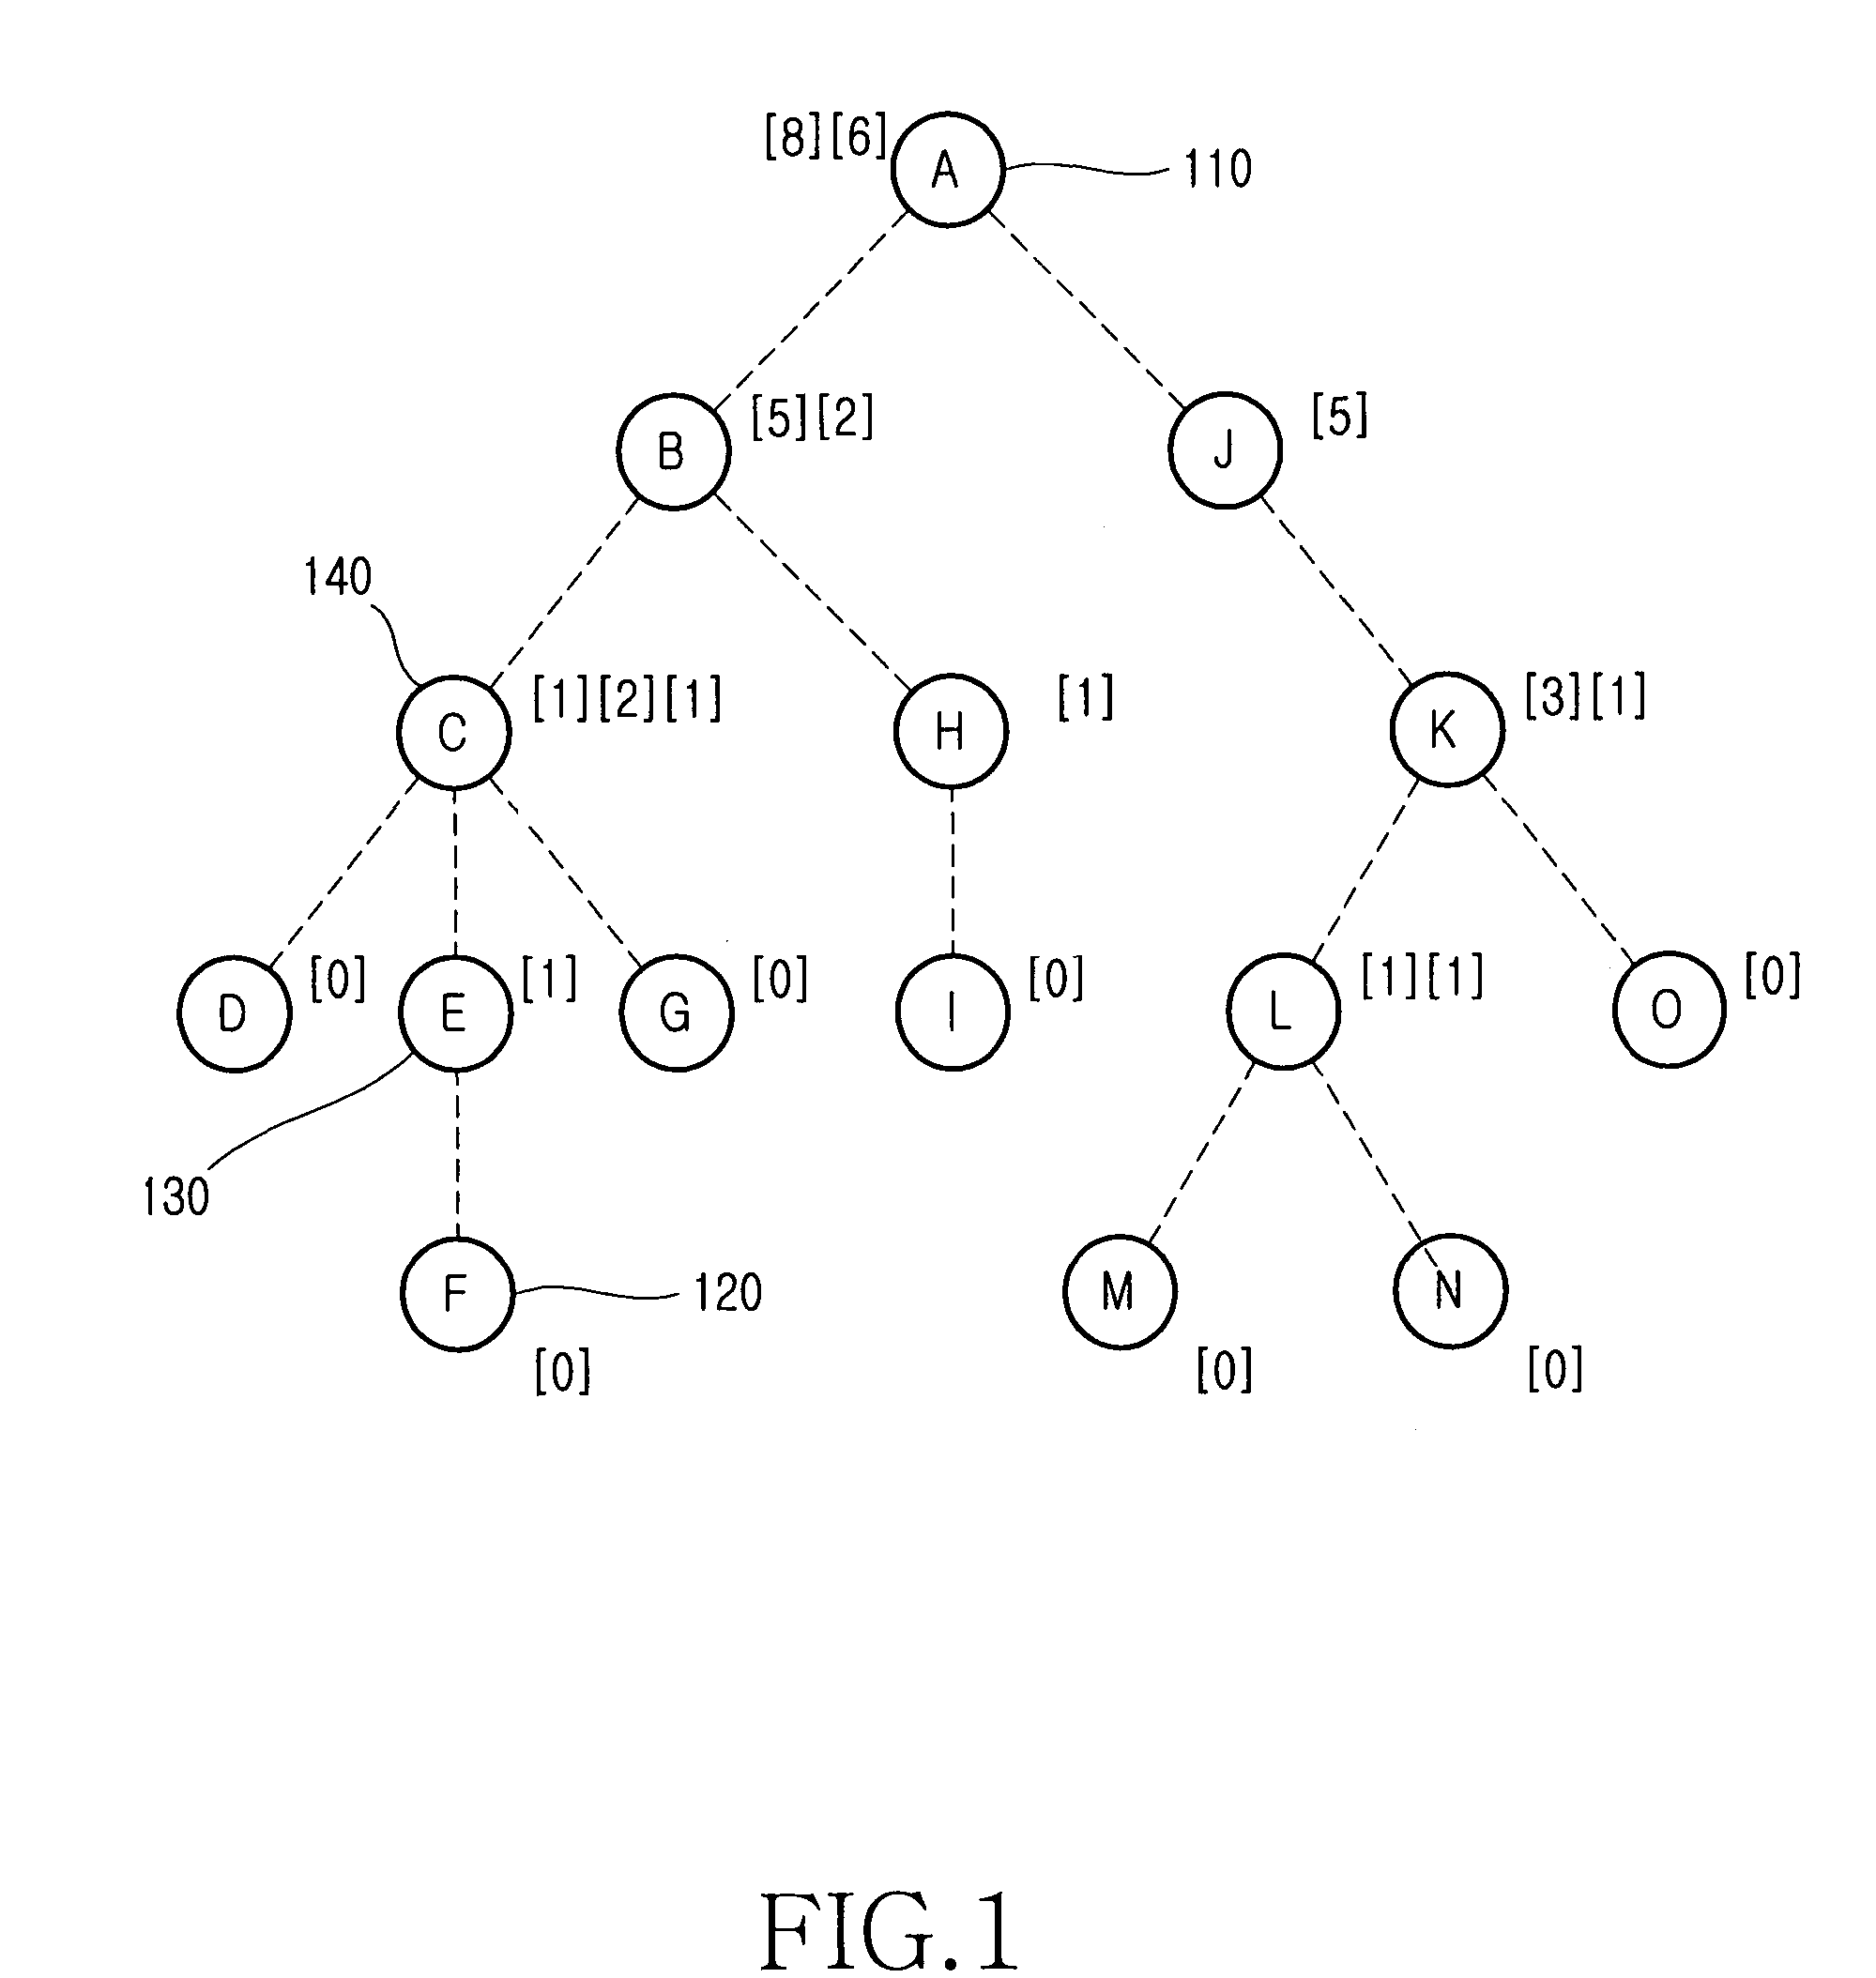 Tree-guided distributed link state routing method